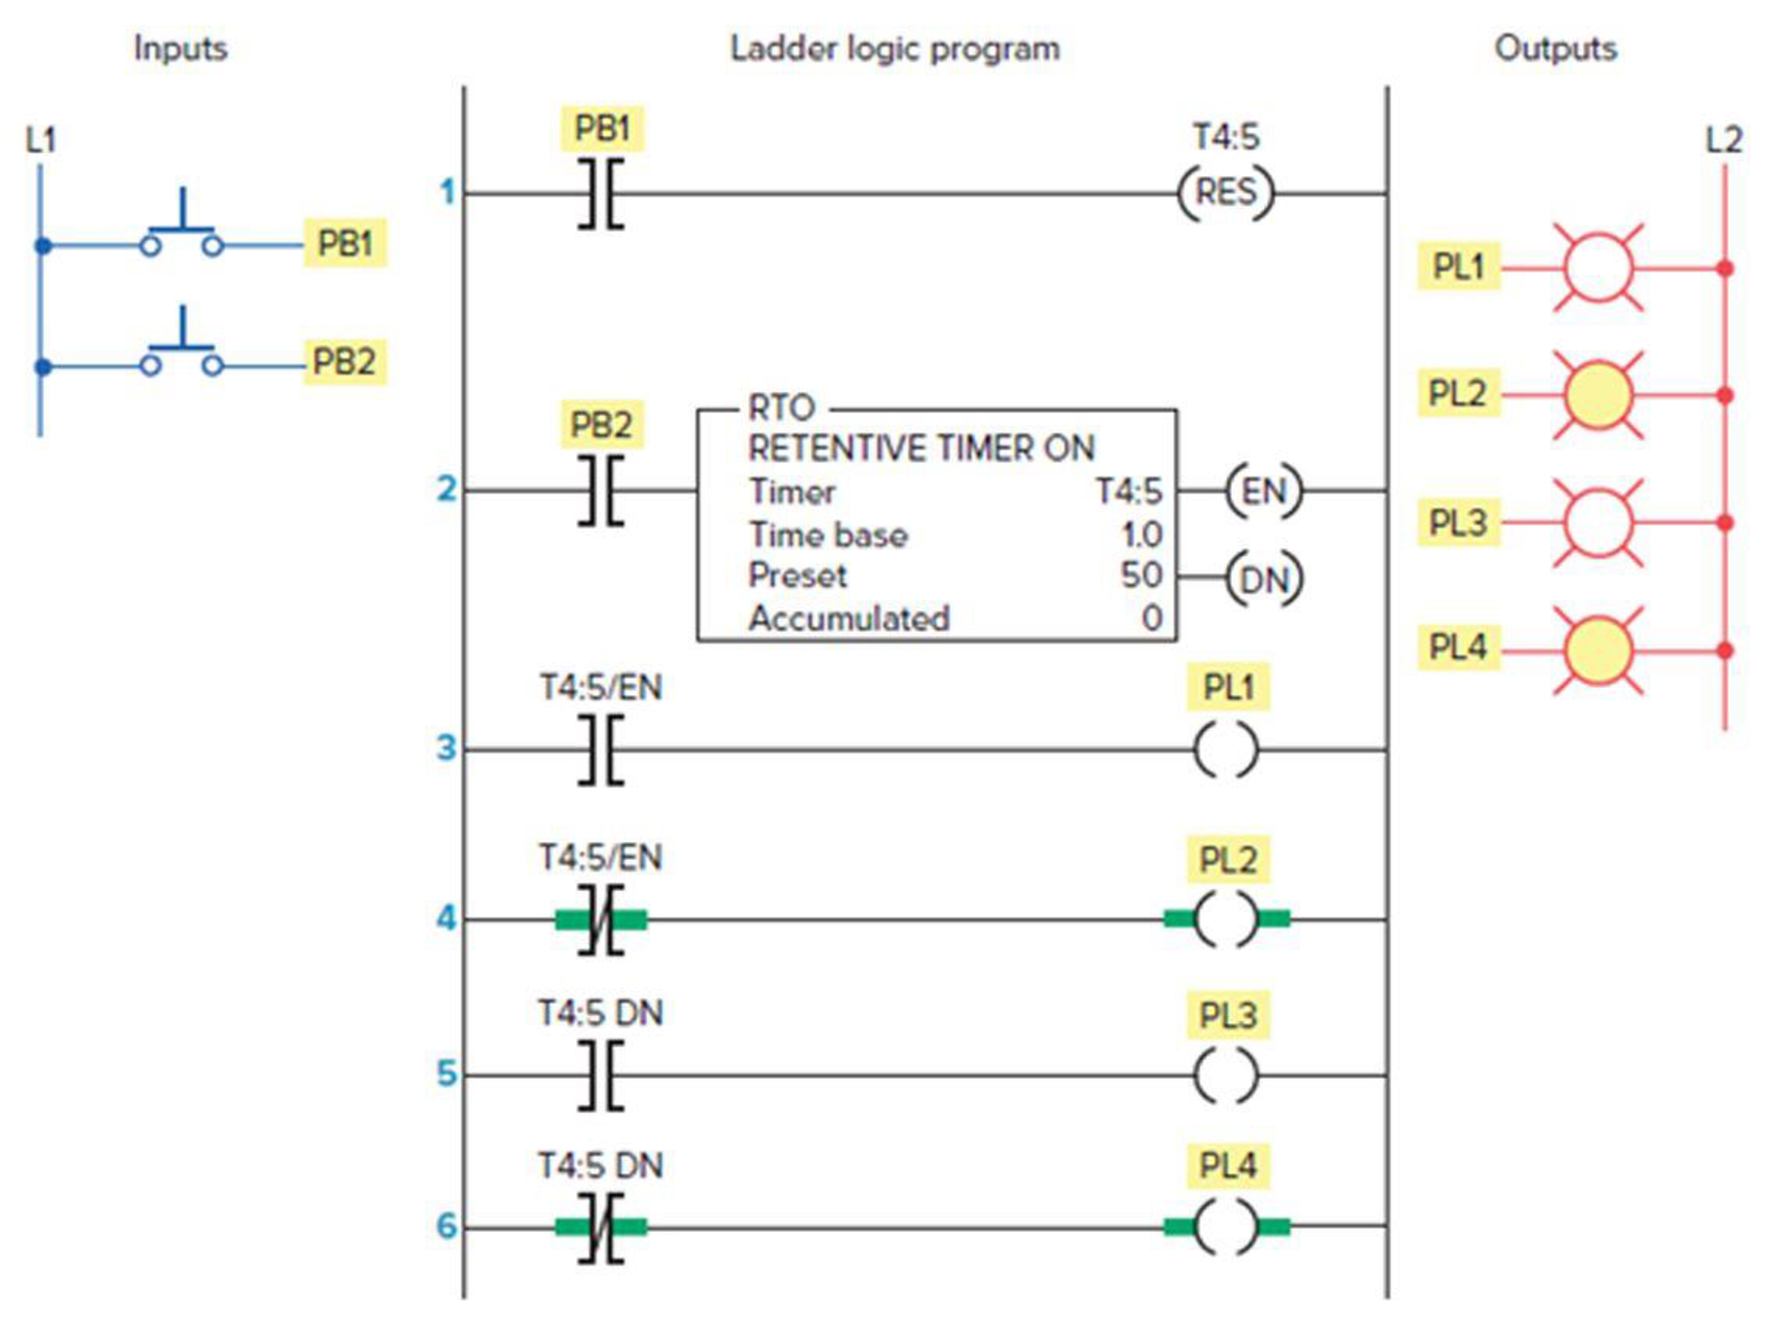 Chapter 7, Problem 5P, Study the ladder logic program in Figure 7-42, and answer the questions that follow: a. What type of 